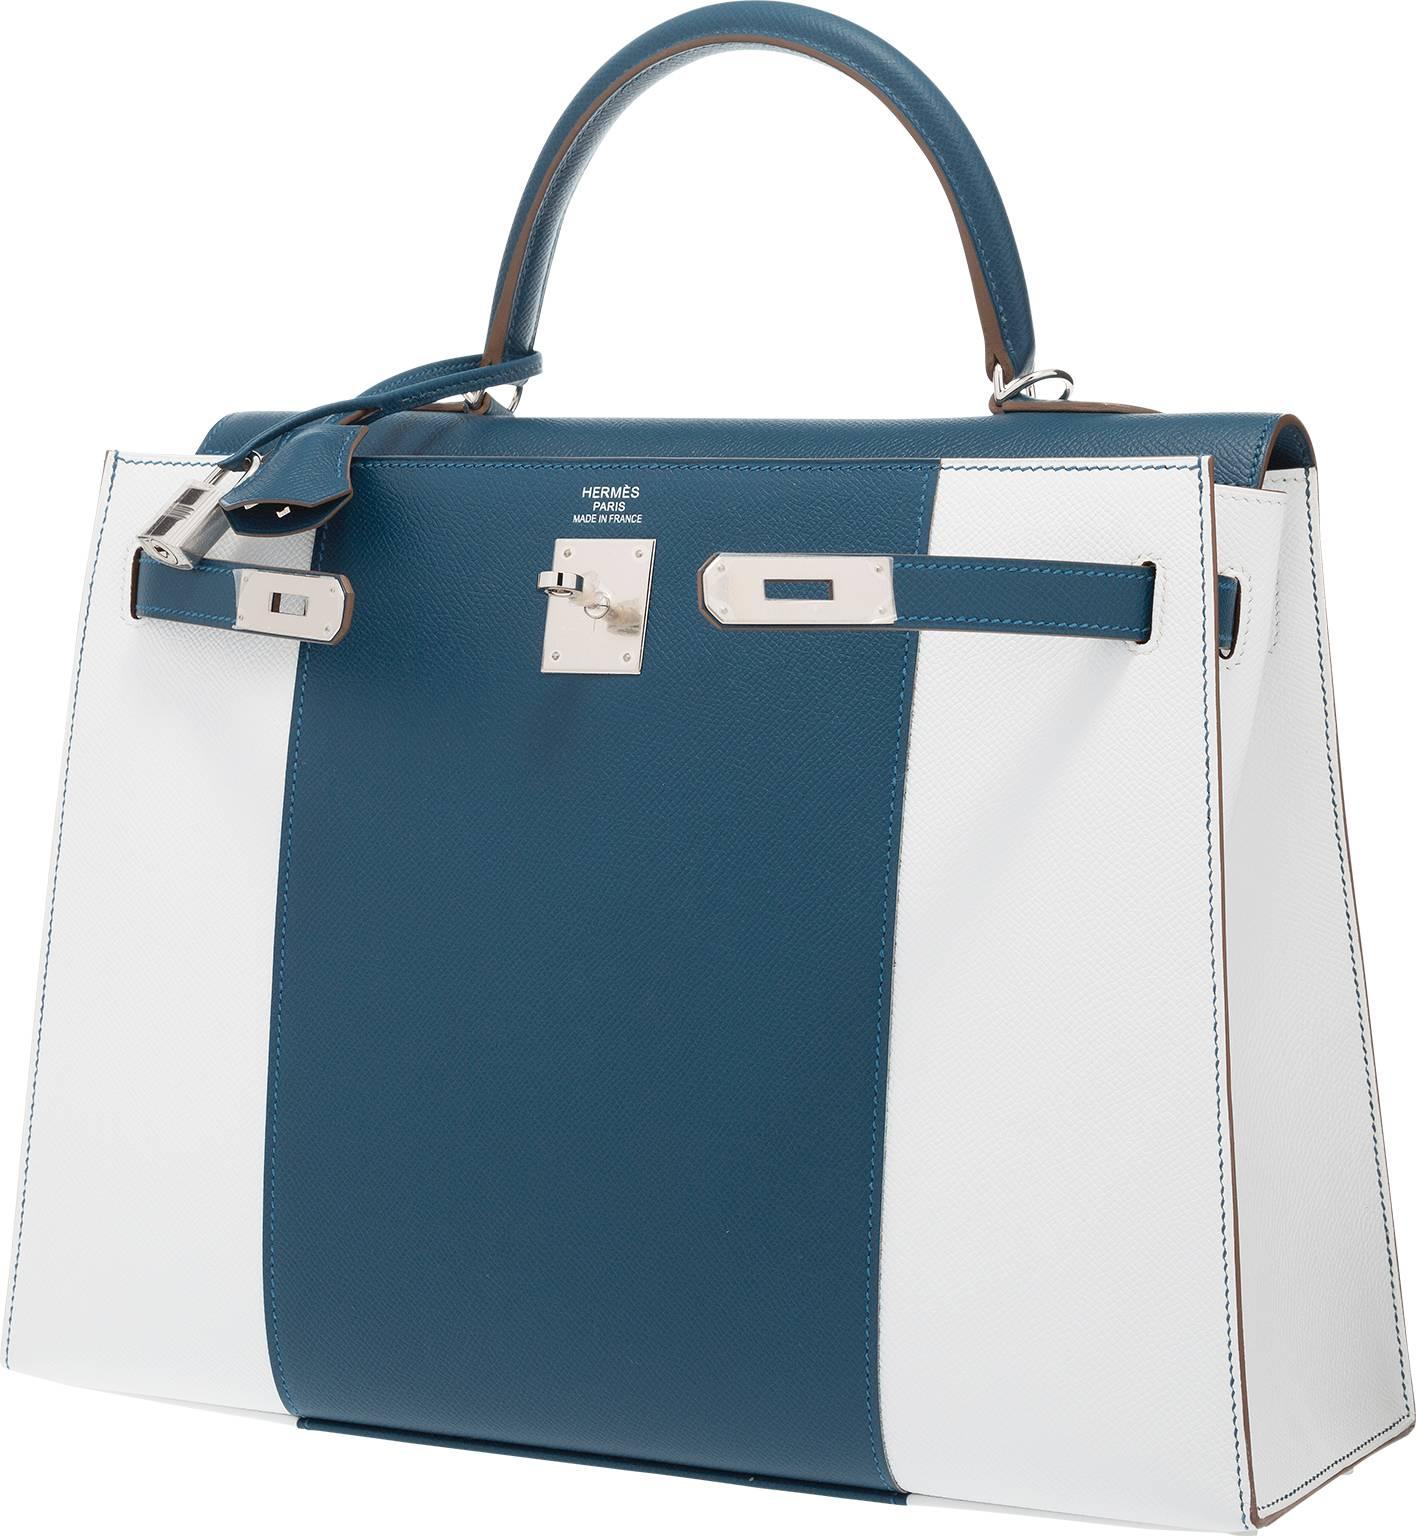 This bag is gorgeous. The exterior is done in Blue Thalassa and White Epsom Leather with Palladium hardware. The interior is done in Blue Thalassa chevre leather with two slip and one zip pockets. This bag comes with a shoulder strap, lock, keys and